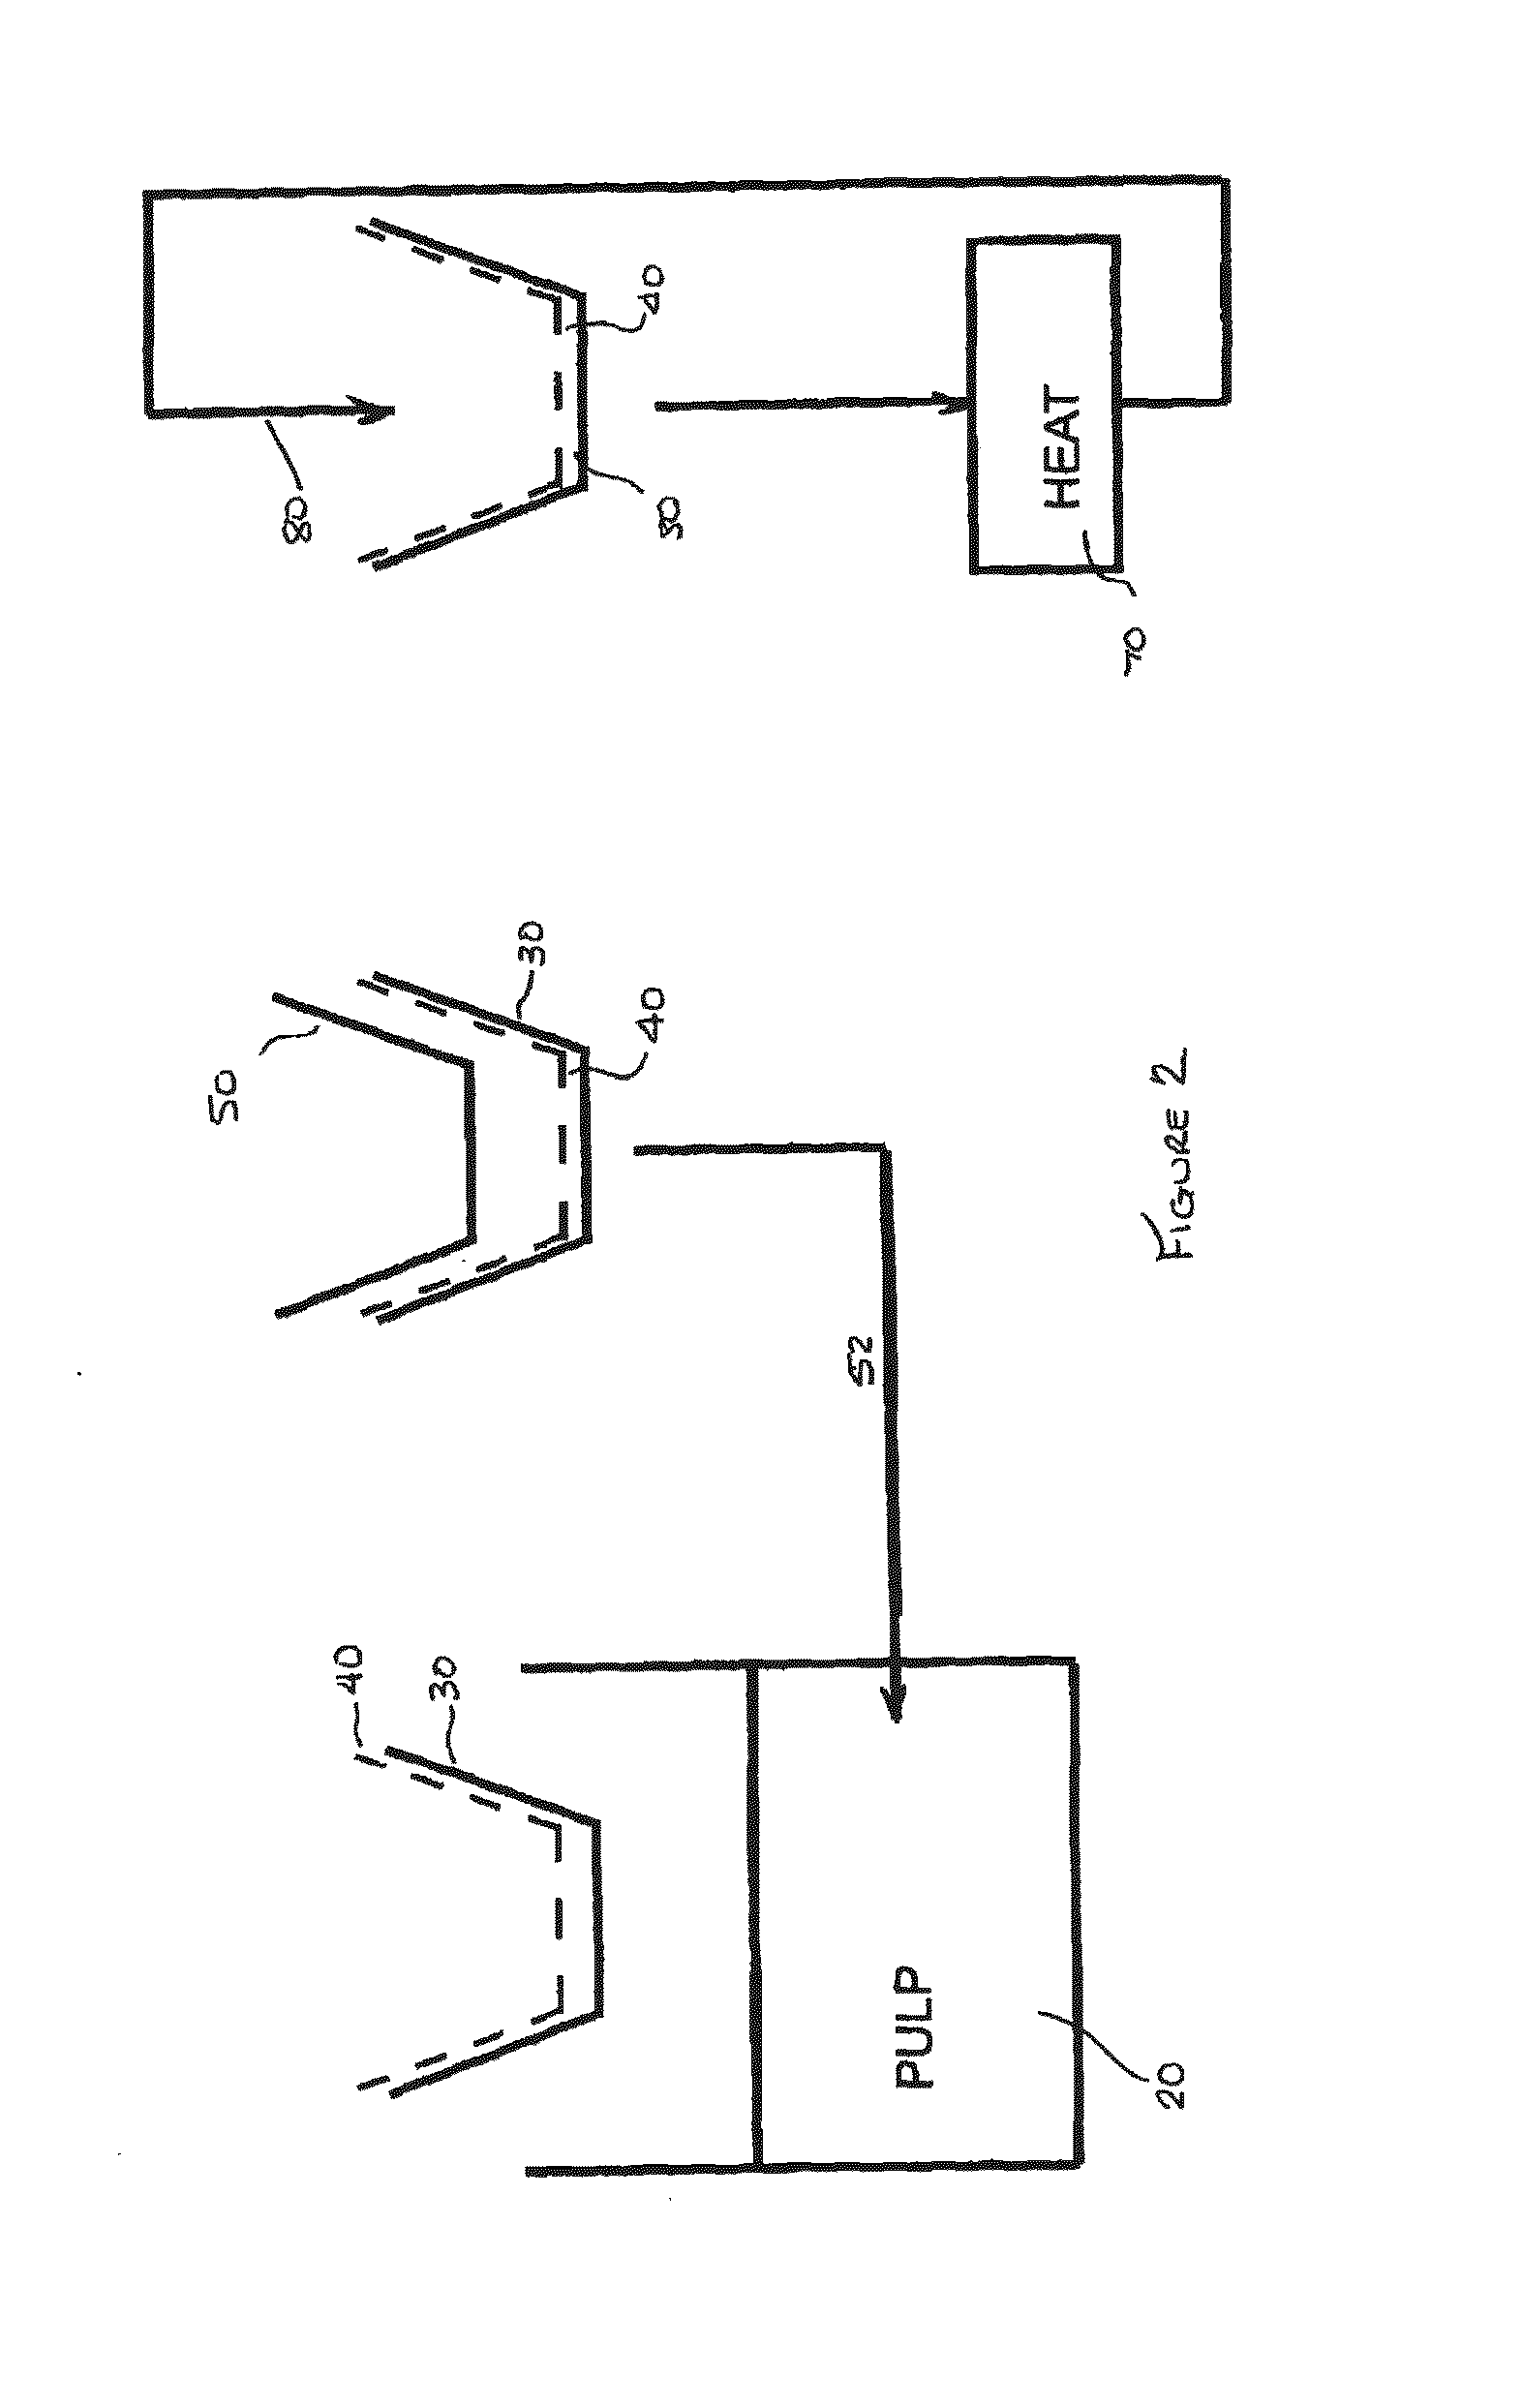 Method and apparatus for forming an article from pulped material